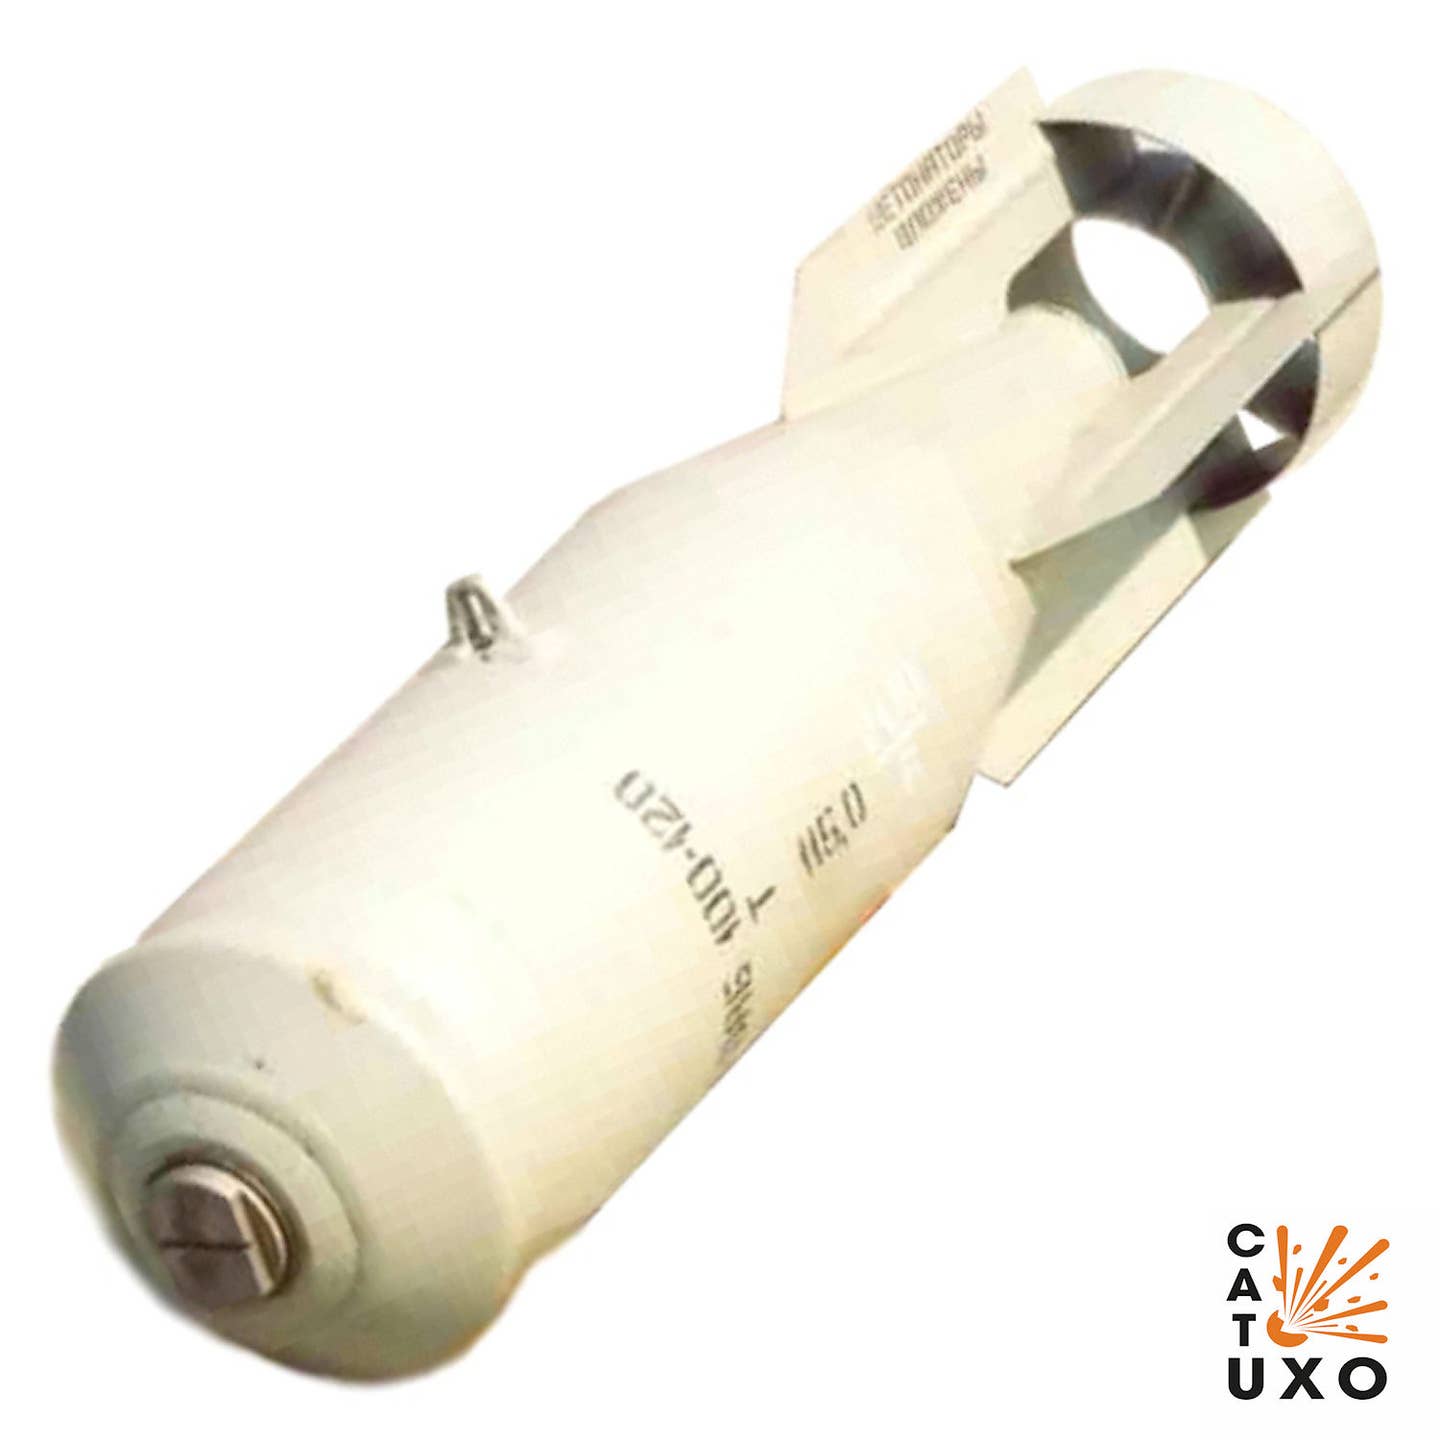 An OFAB-100-120 high-explosive aerial bomb. (Collective Awareness to UXO photo)